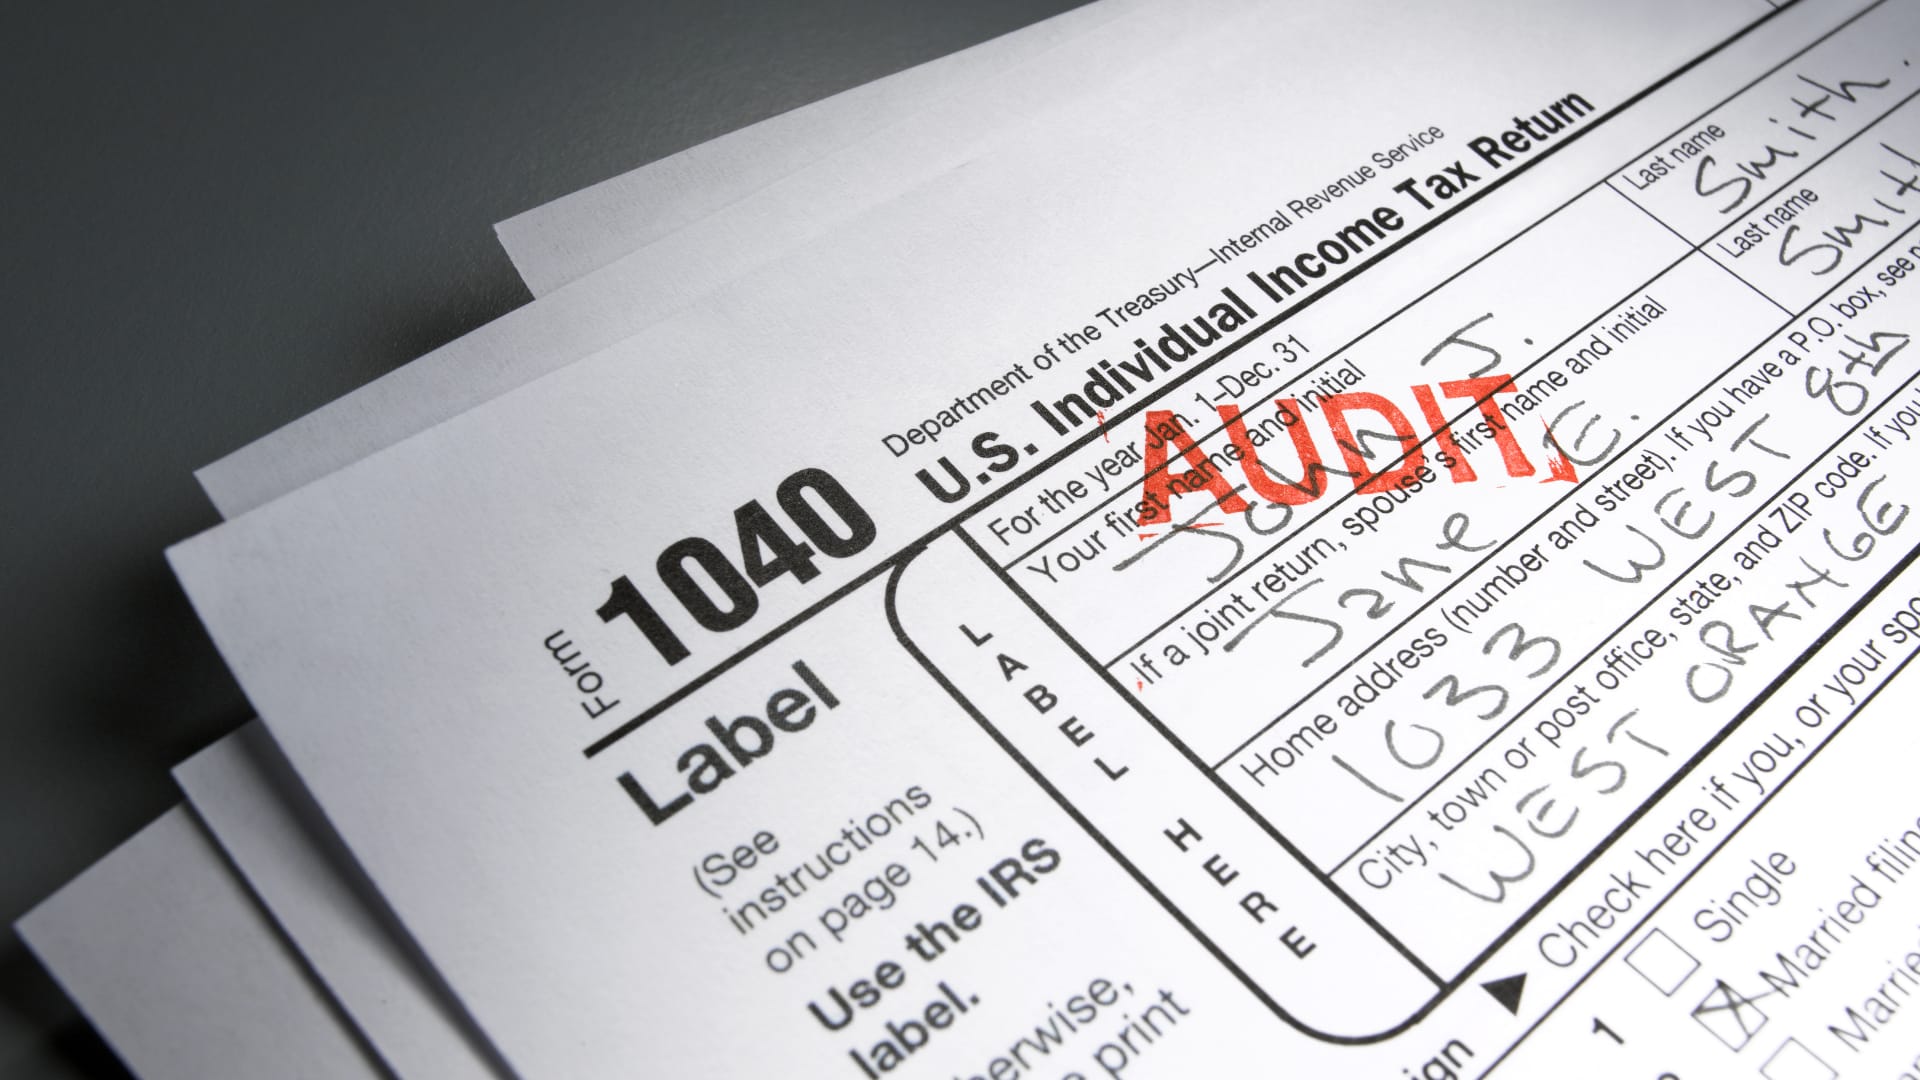 With the IRS hiring more employees, here's who agents may target for audits